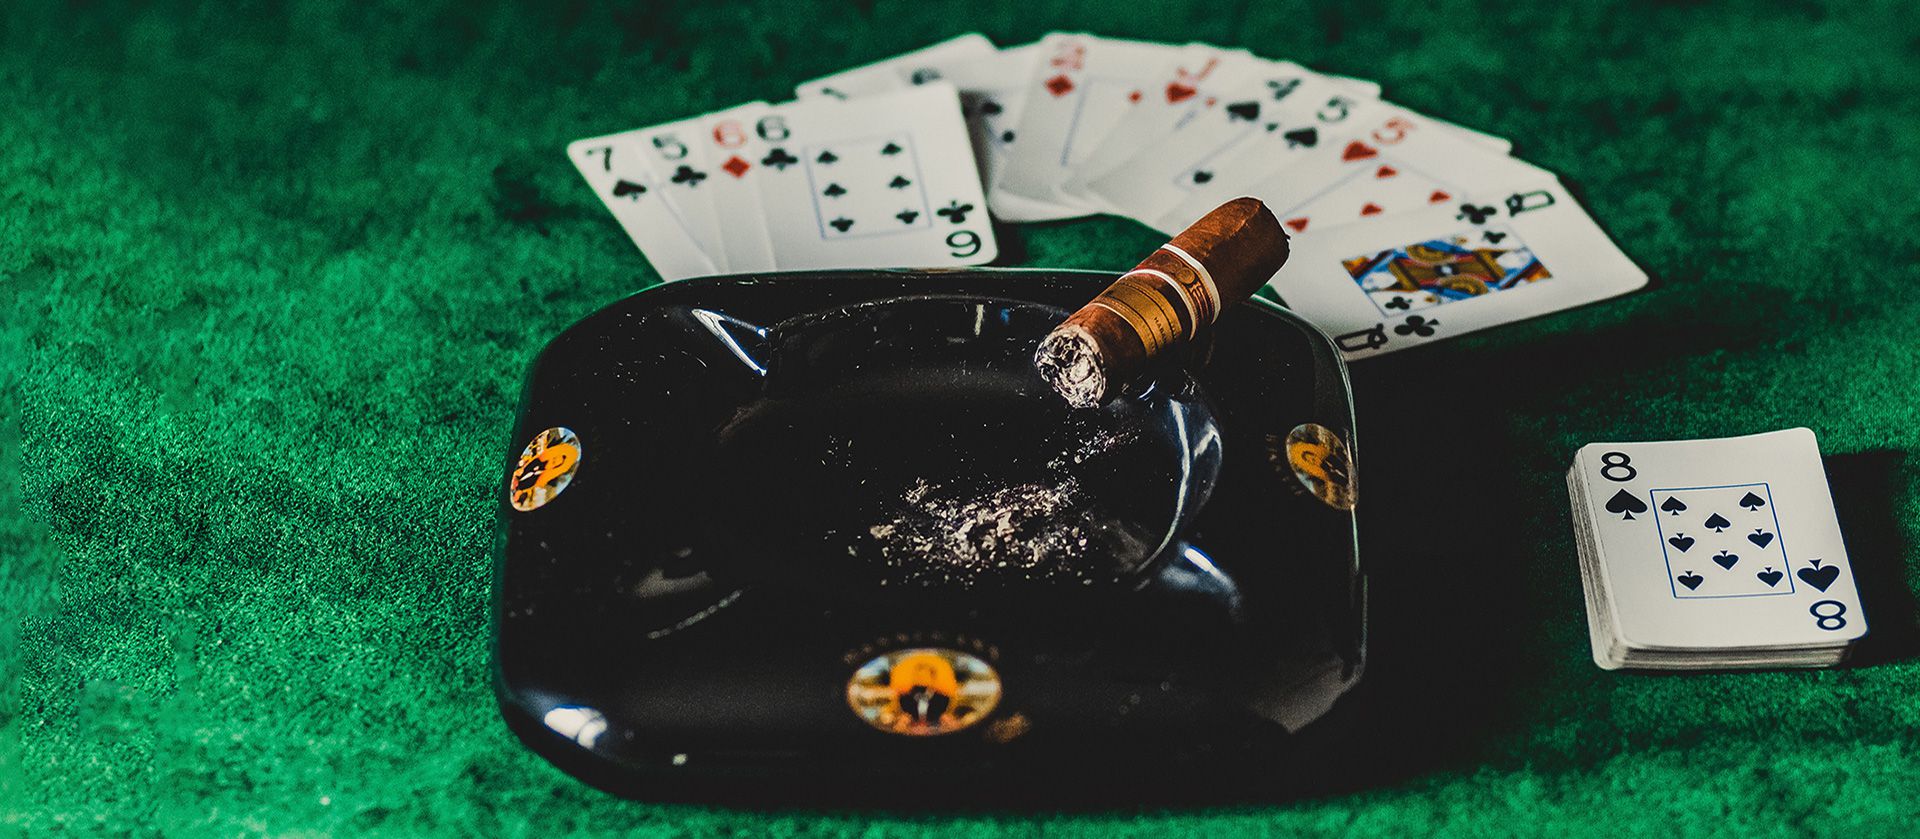 Cigar with cards on the gaming table.